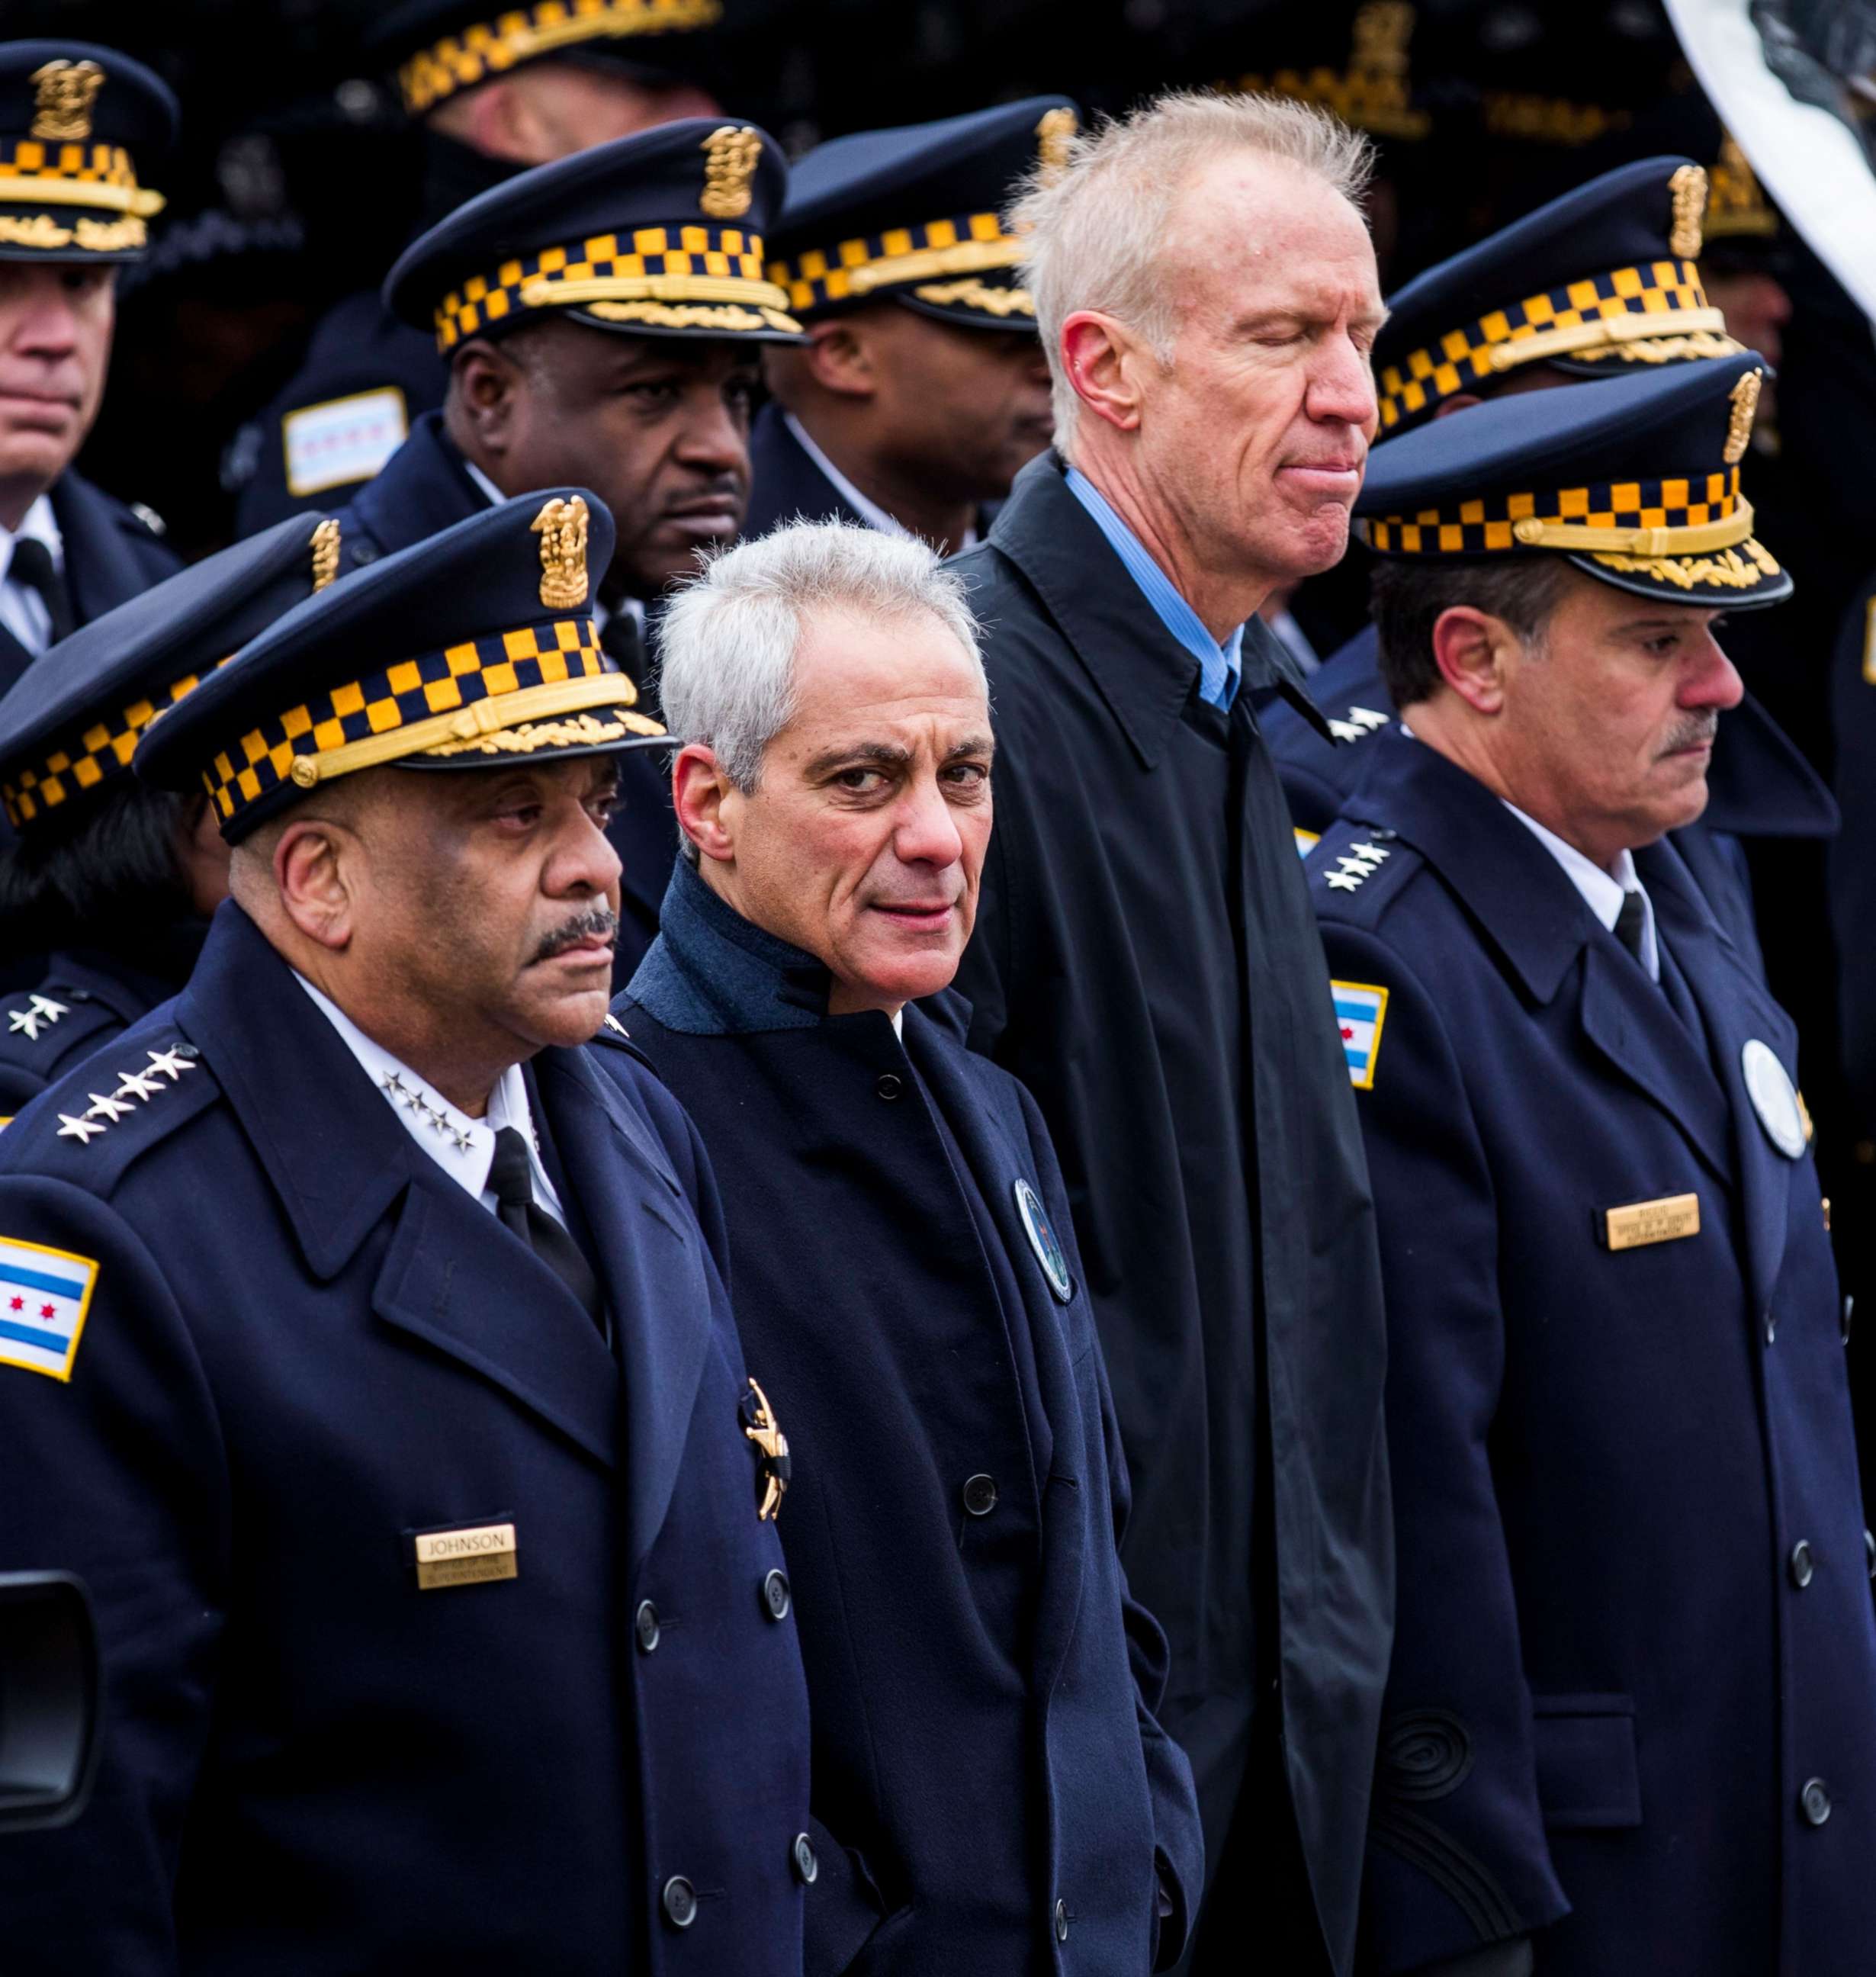 PHOTO: Chicago Mayor Rahm Emanuel stands with Chicago Police Superintendent Eddie Johnson, left, and Illinois Governor Bruce Rauner at funeral services for Chicago Police Officer Samuel Jimenez in Des Plaines, Ill., Nov. 26, 2018.